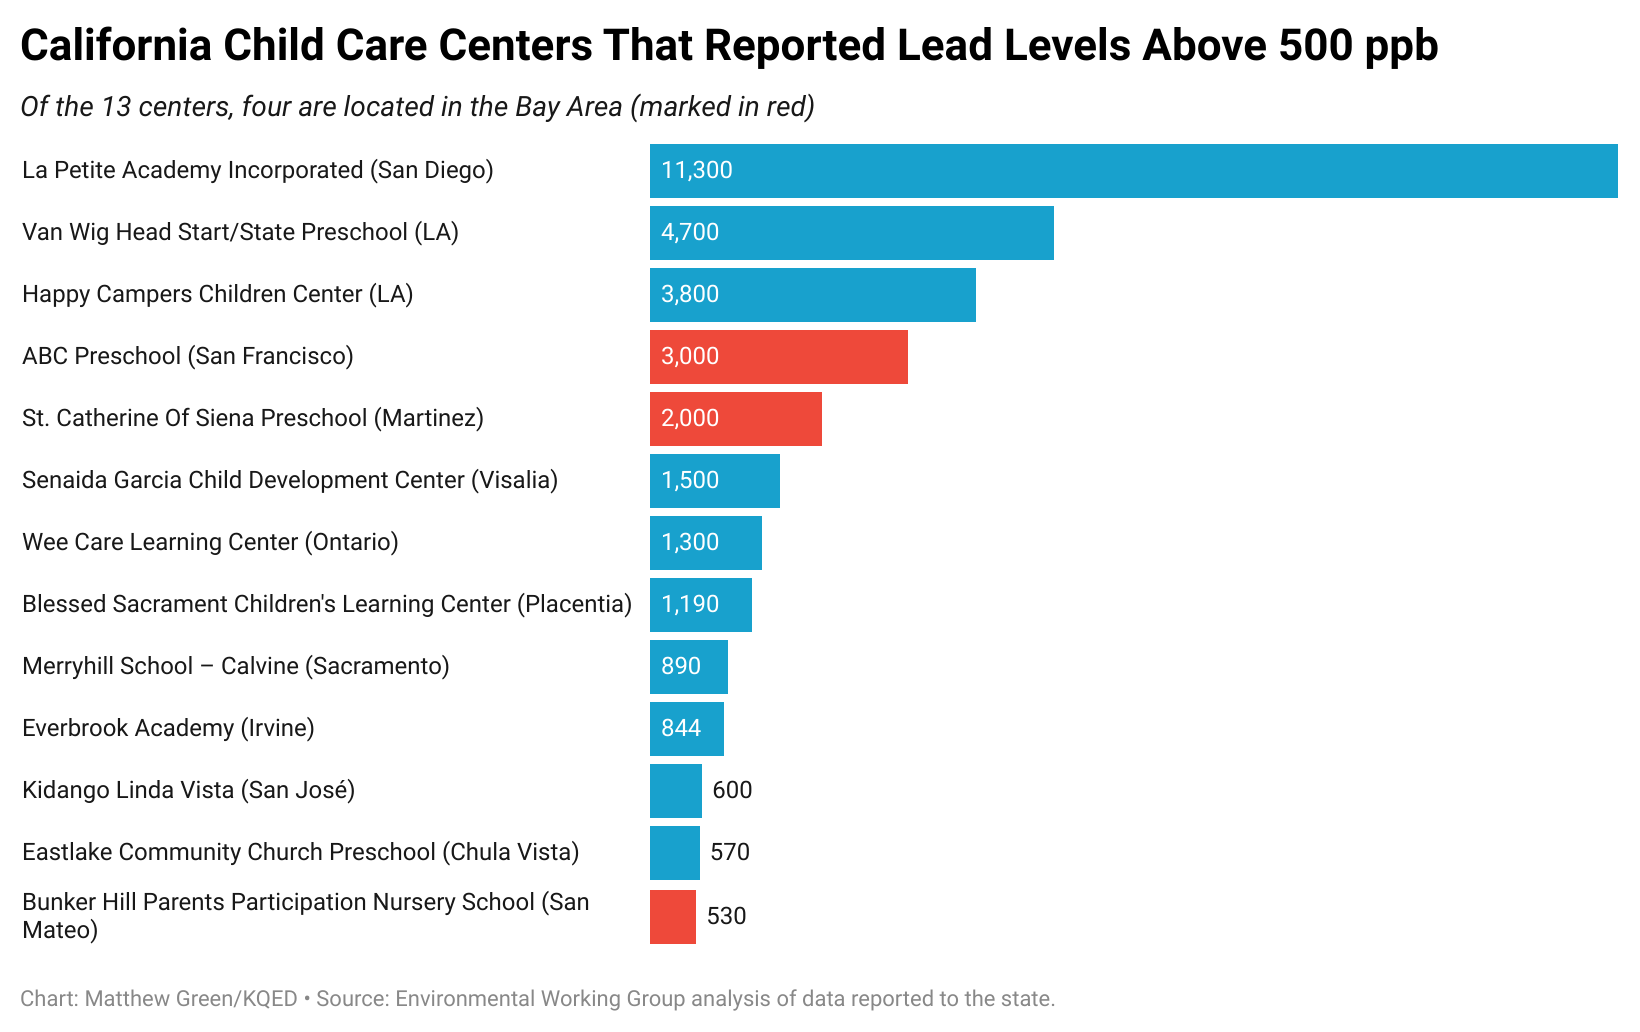 A bar chart showing 13 child care centers in California with the highest lead levels.